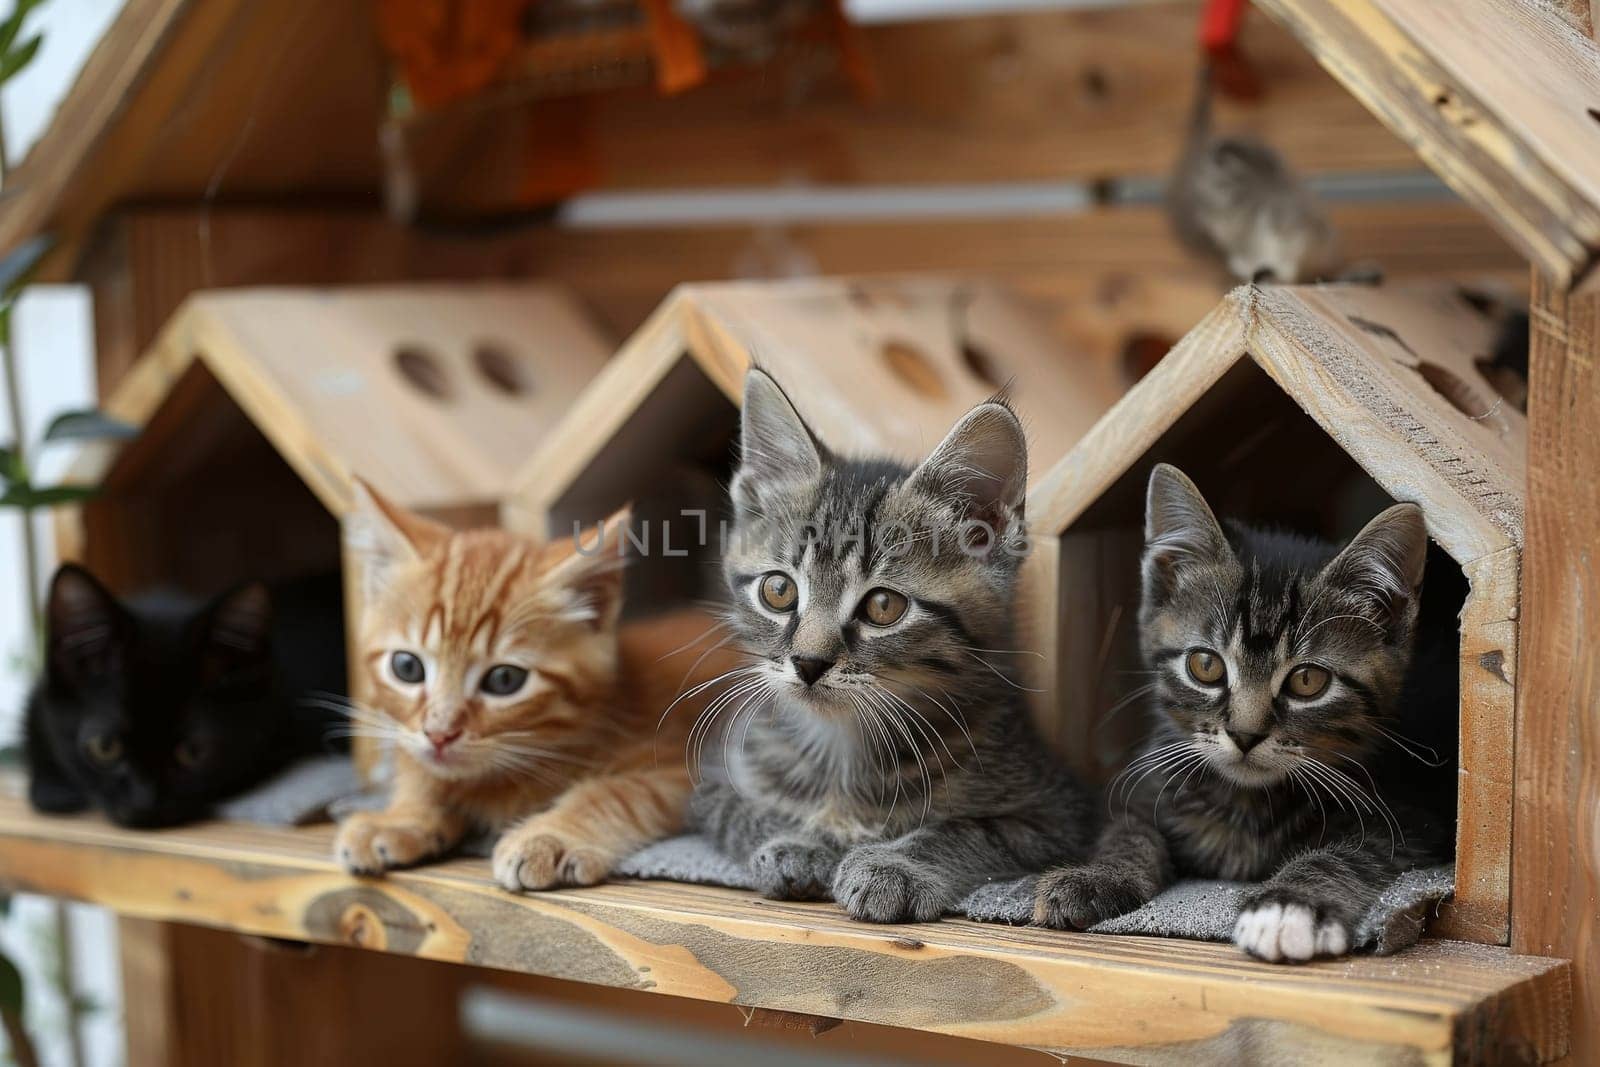 A group of cats are laying on a wooden structure by itchaznong